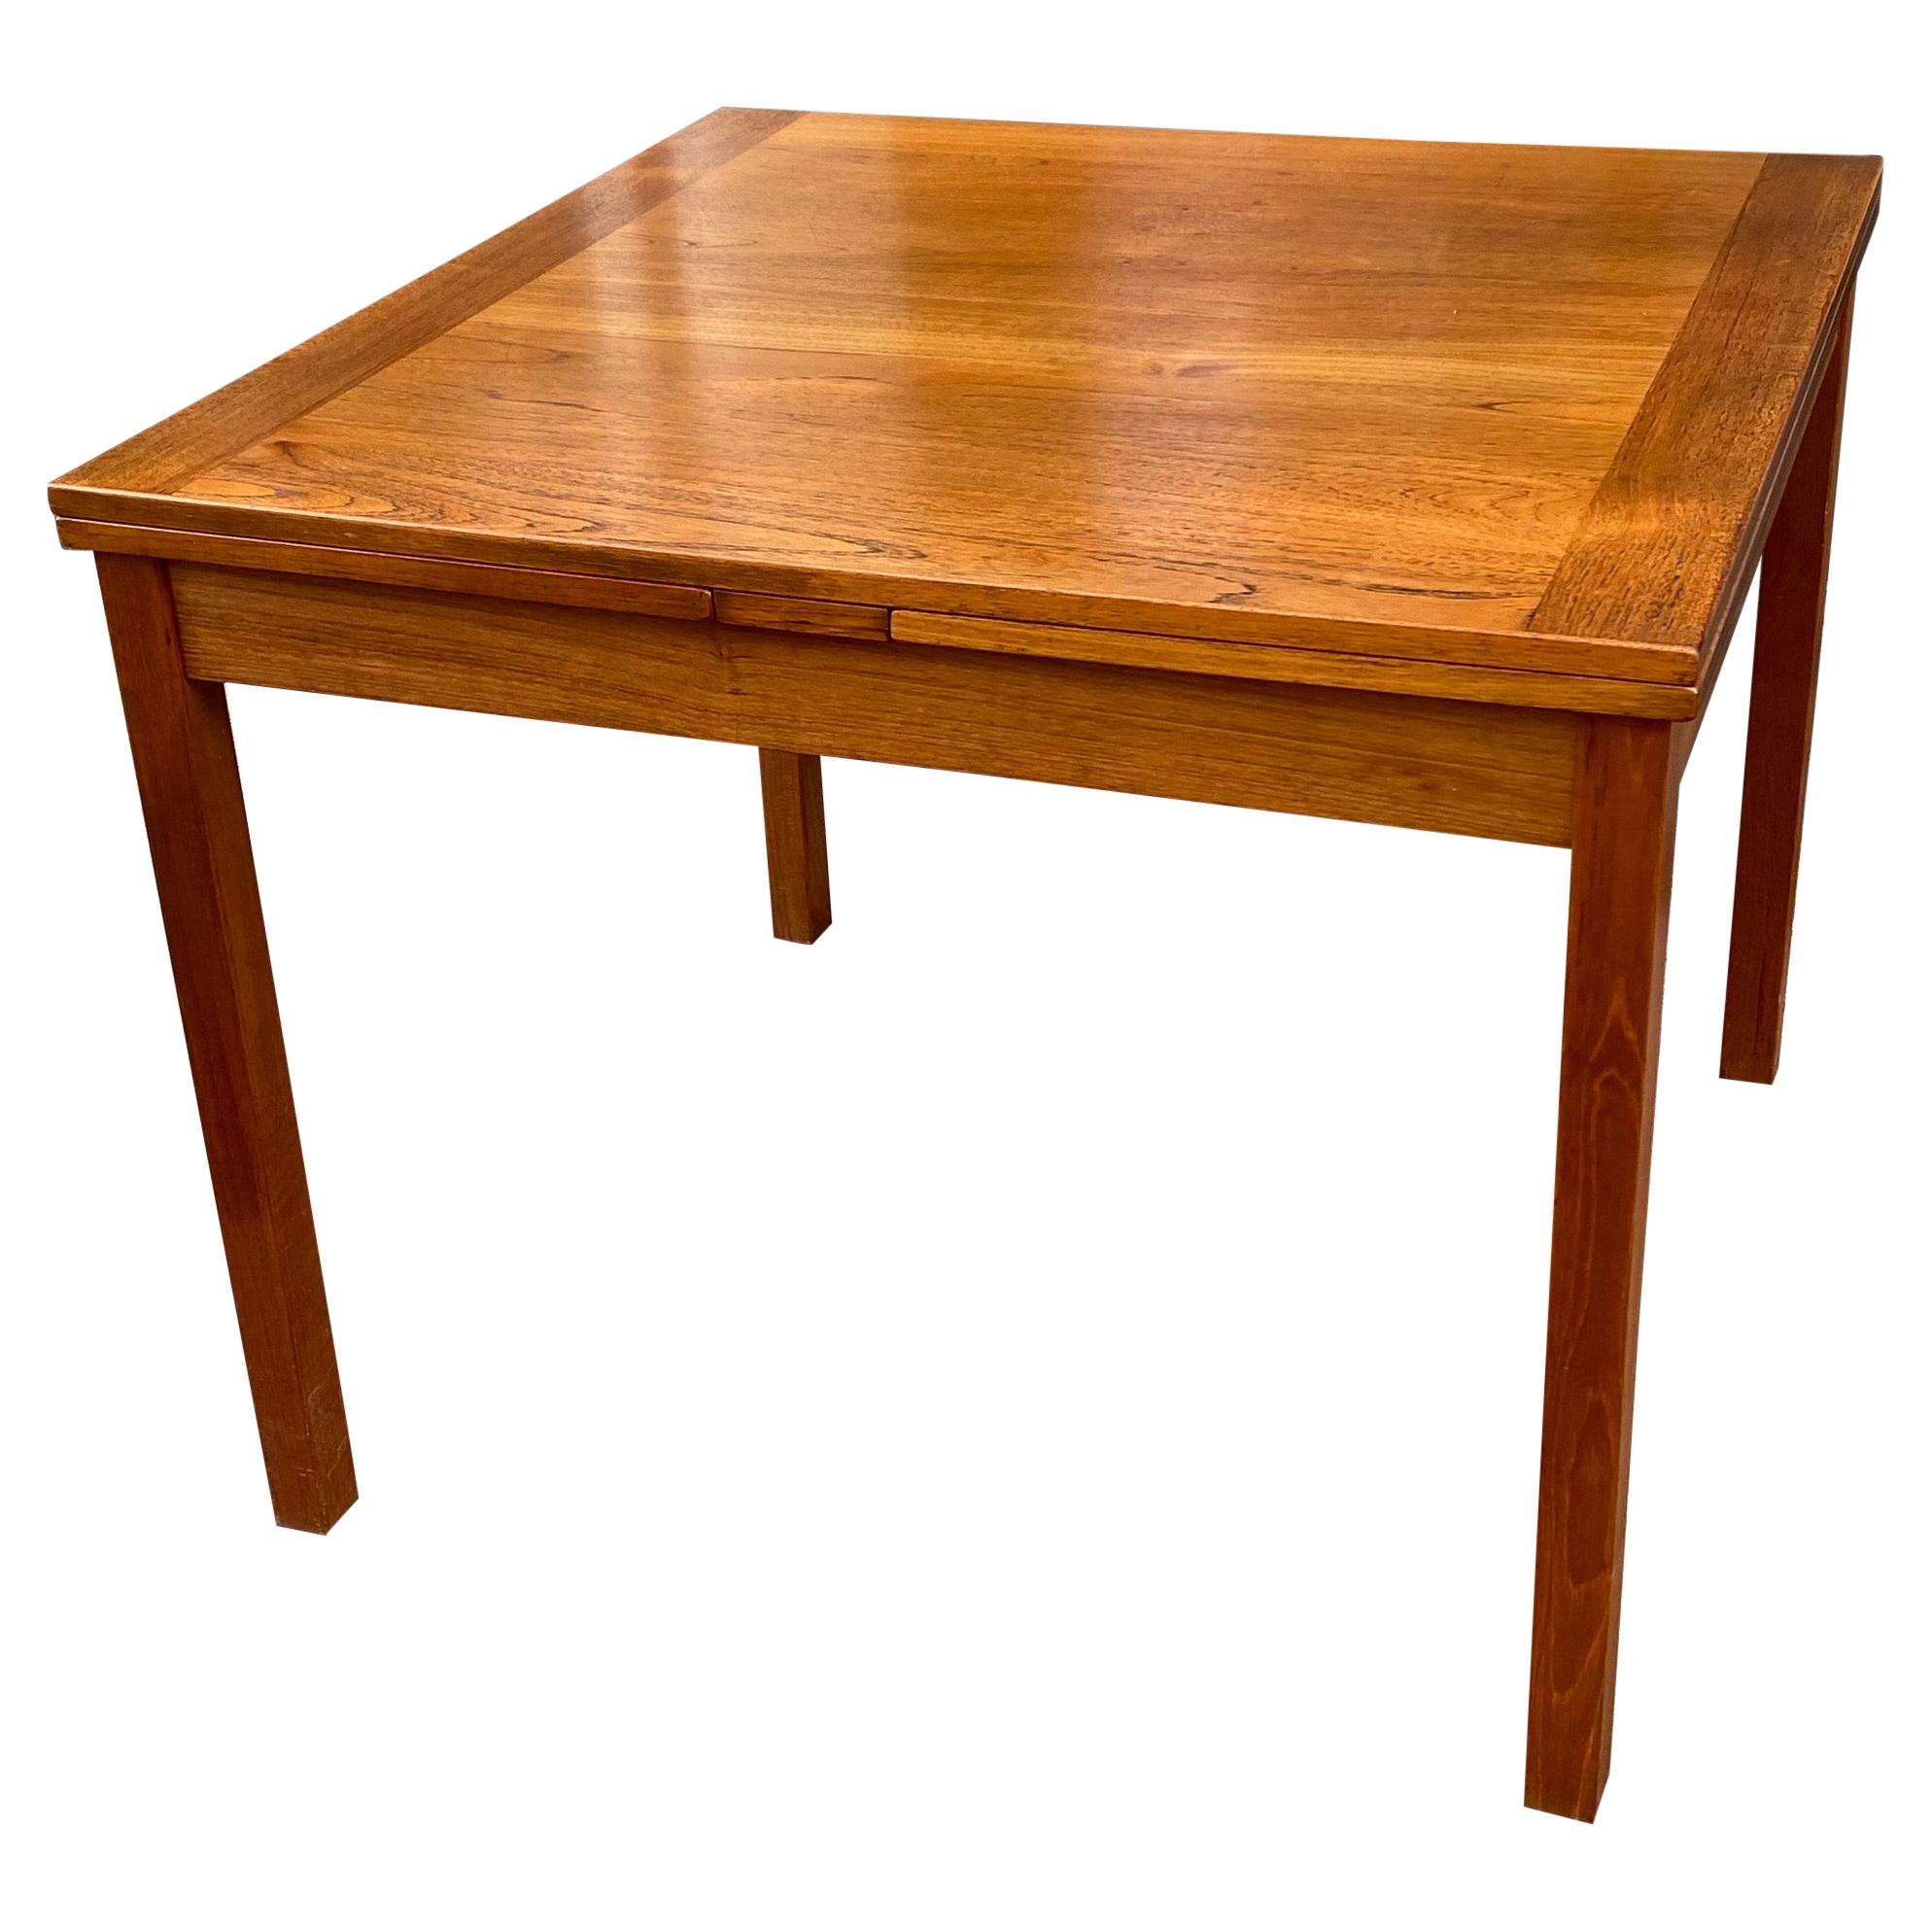 Danish Teak Square Table with Pull Out Leaves